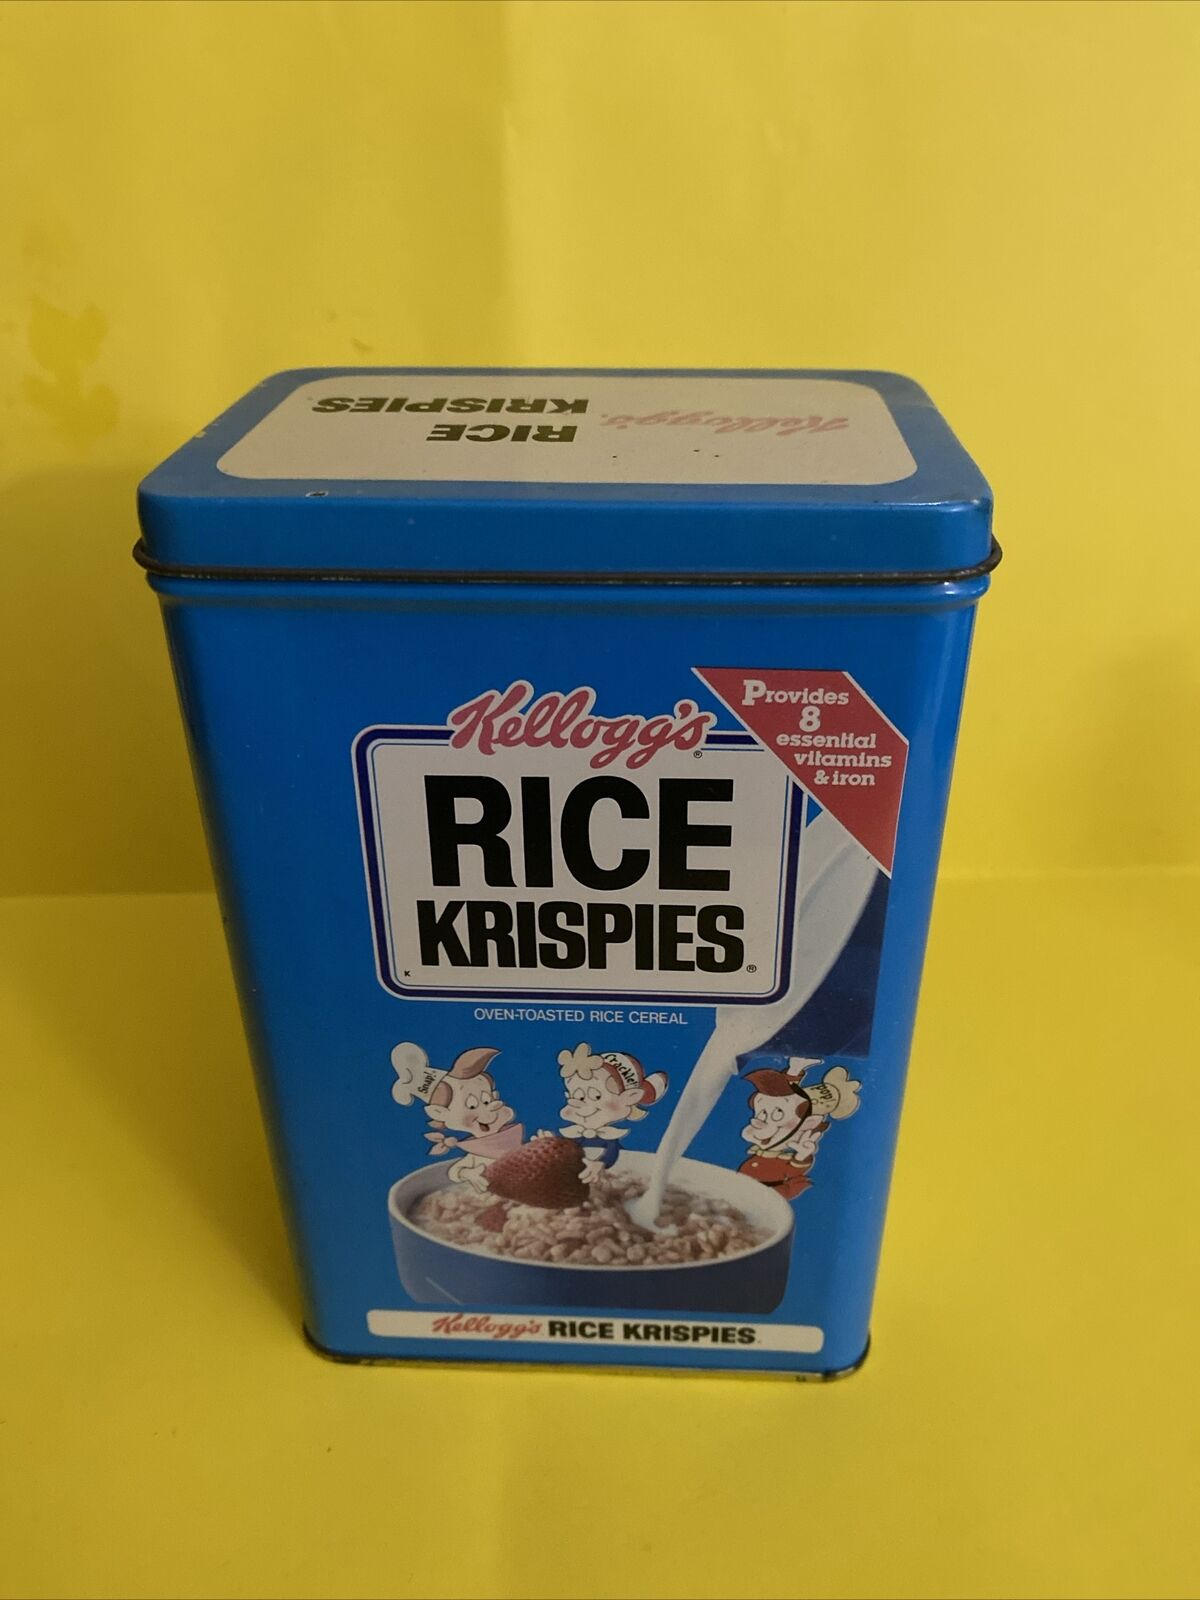 KELLOGG'S RICE KRISPIES 1994 TIN CONTAINER 7” TALL  X  4 1/4” LENGTH X 3” WIDE